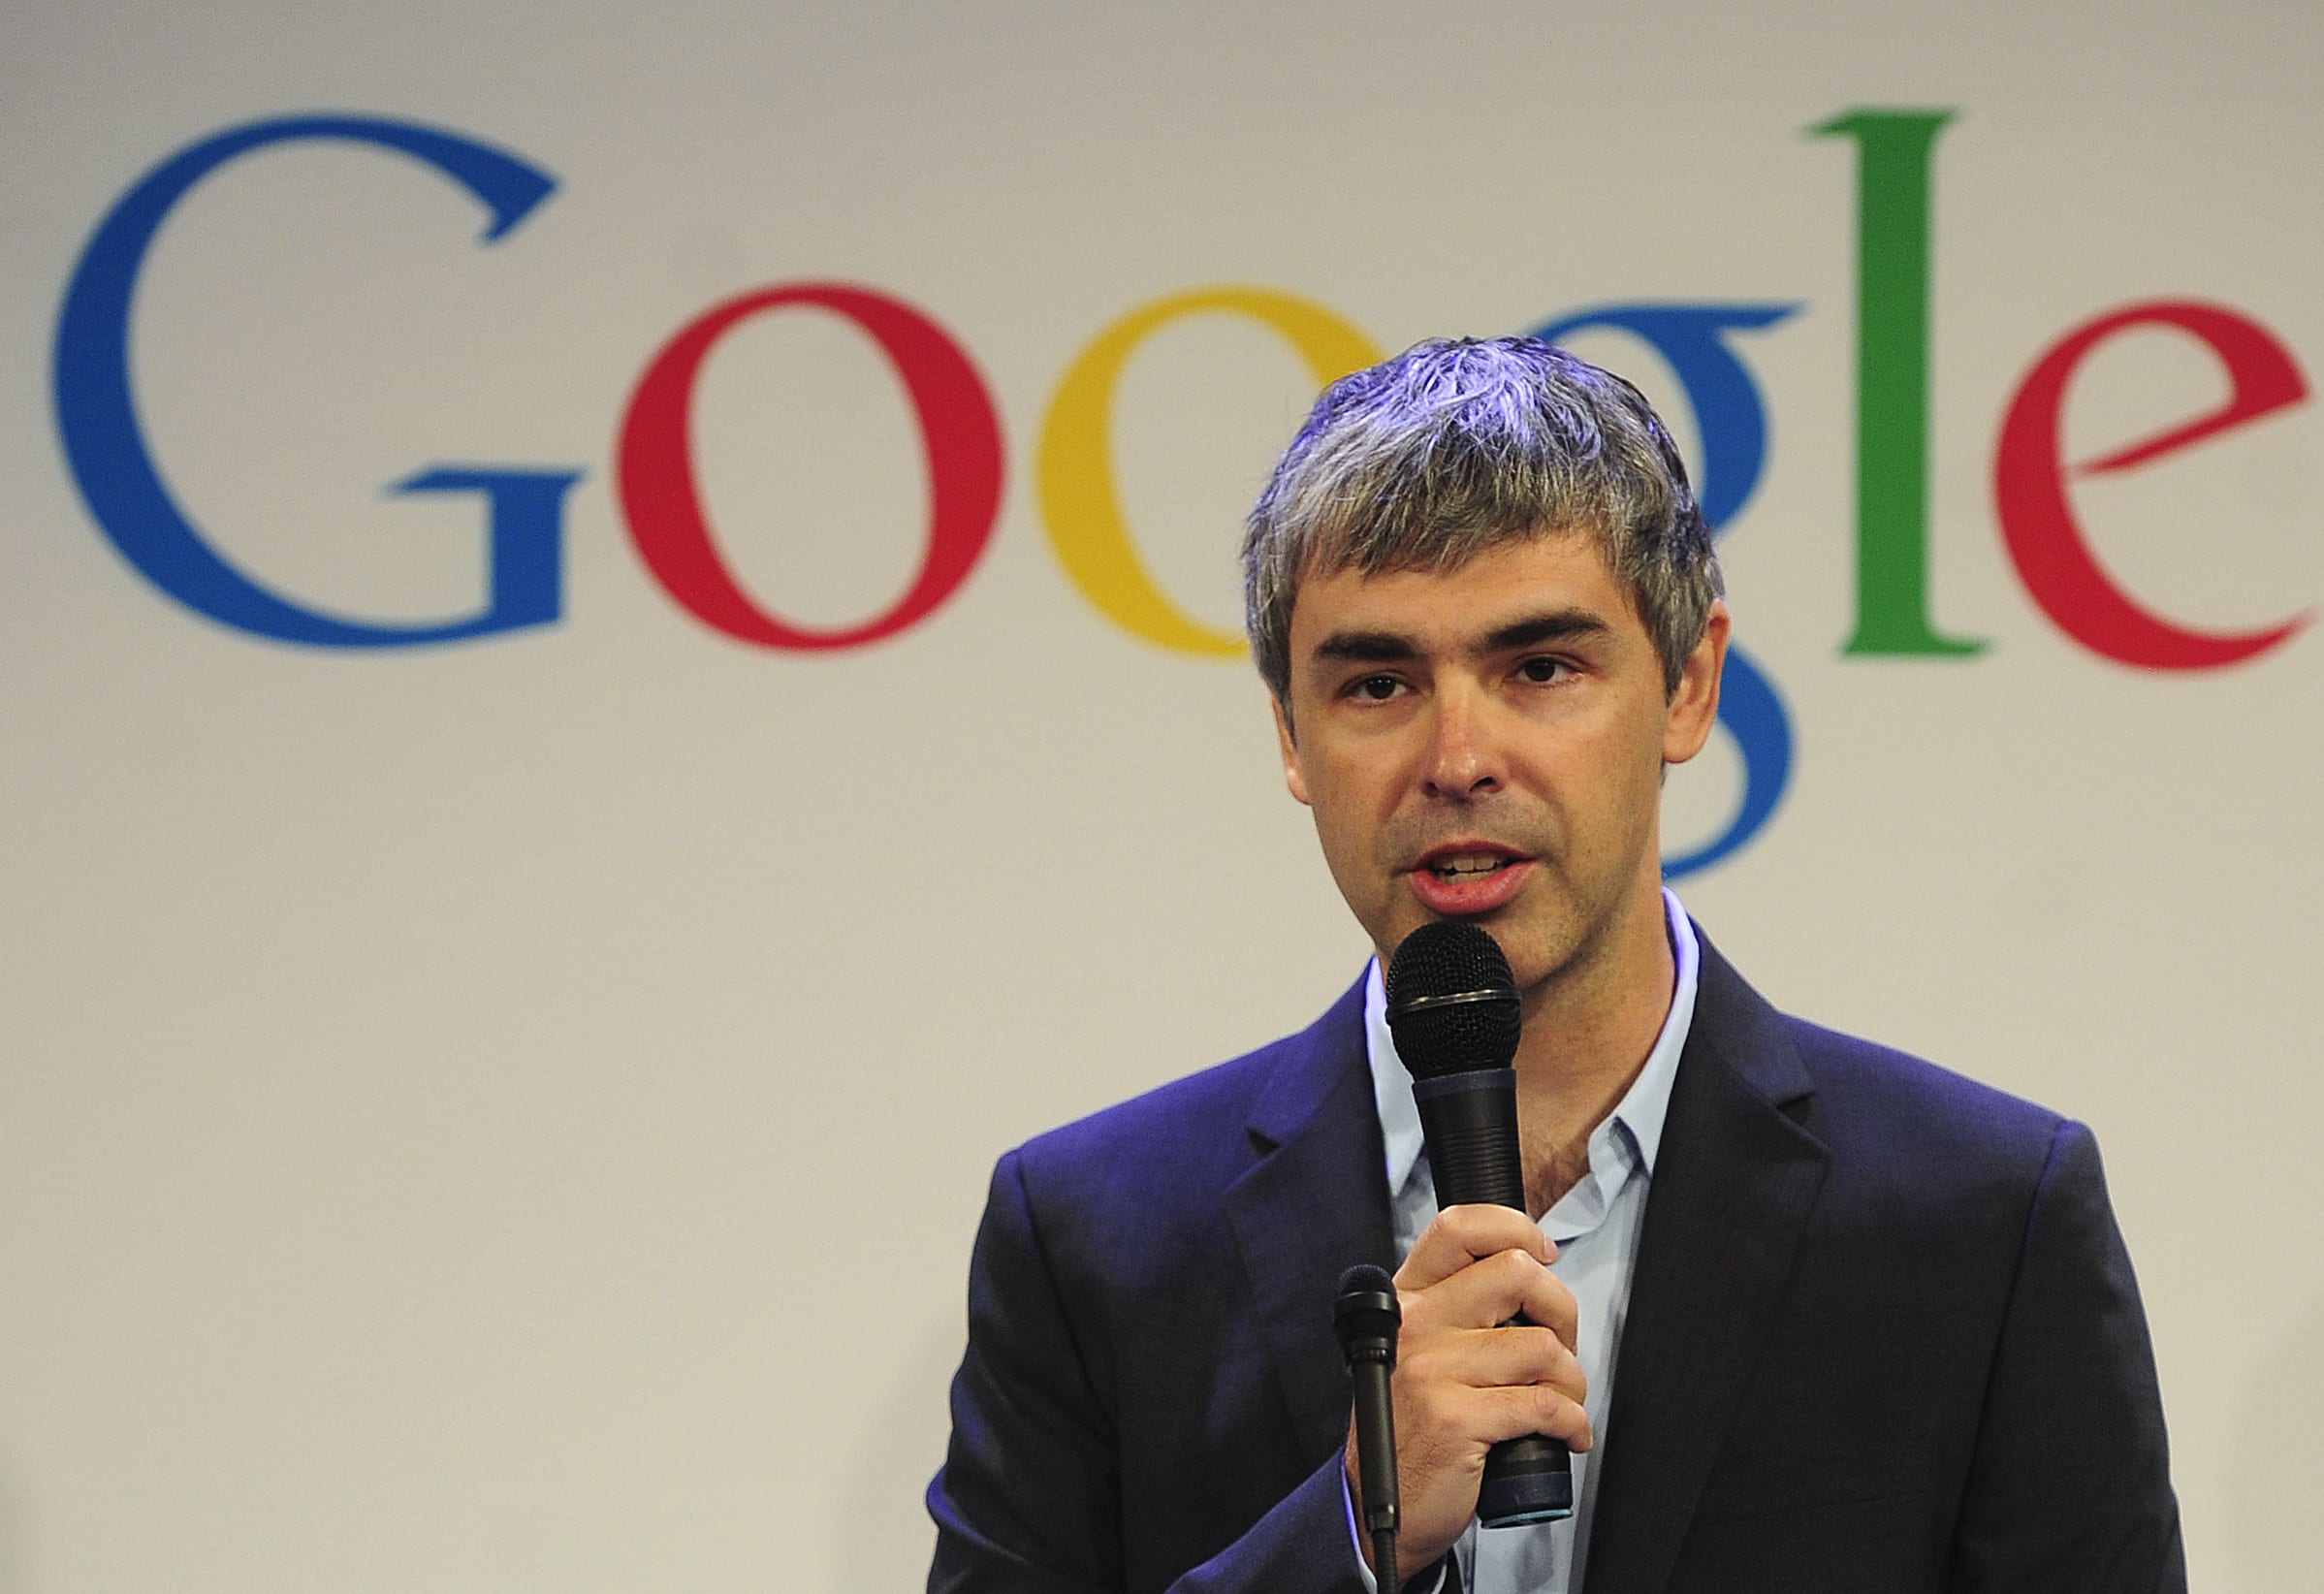 Larry Page: Google Co-Founder And Former CEO Of Alphabet